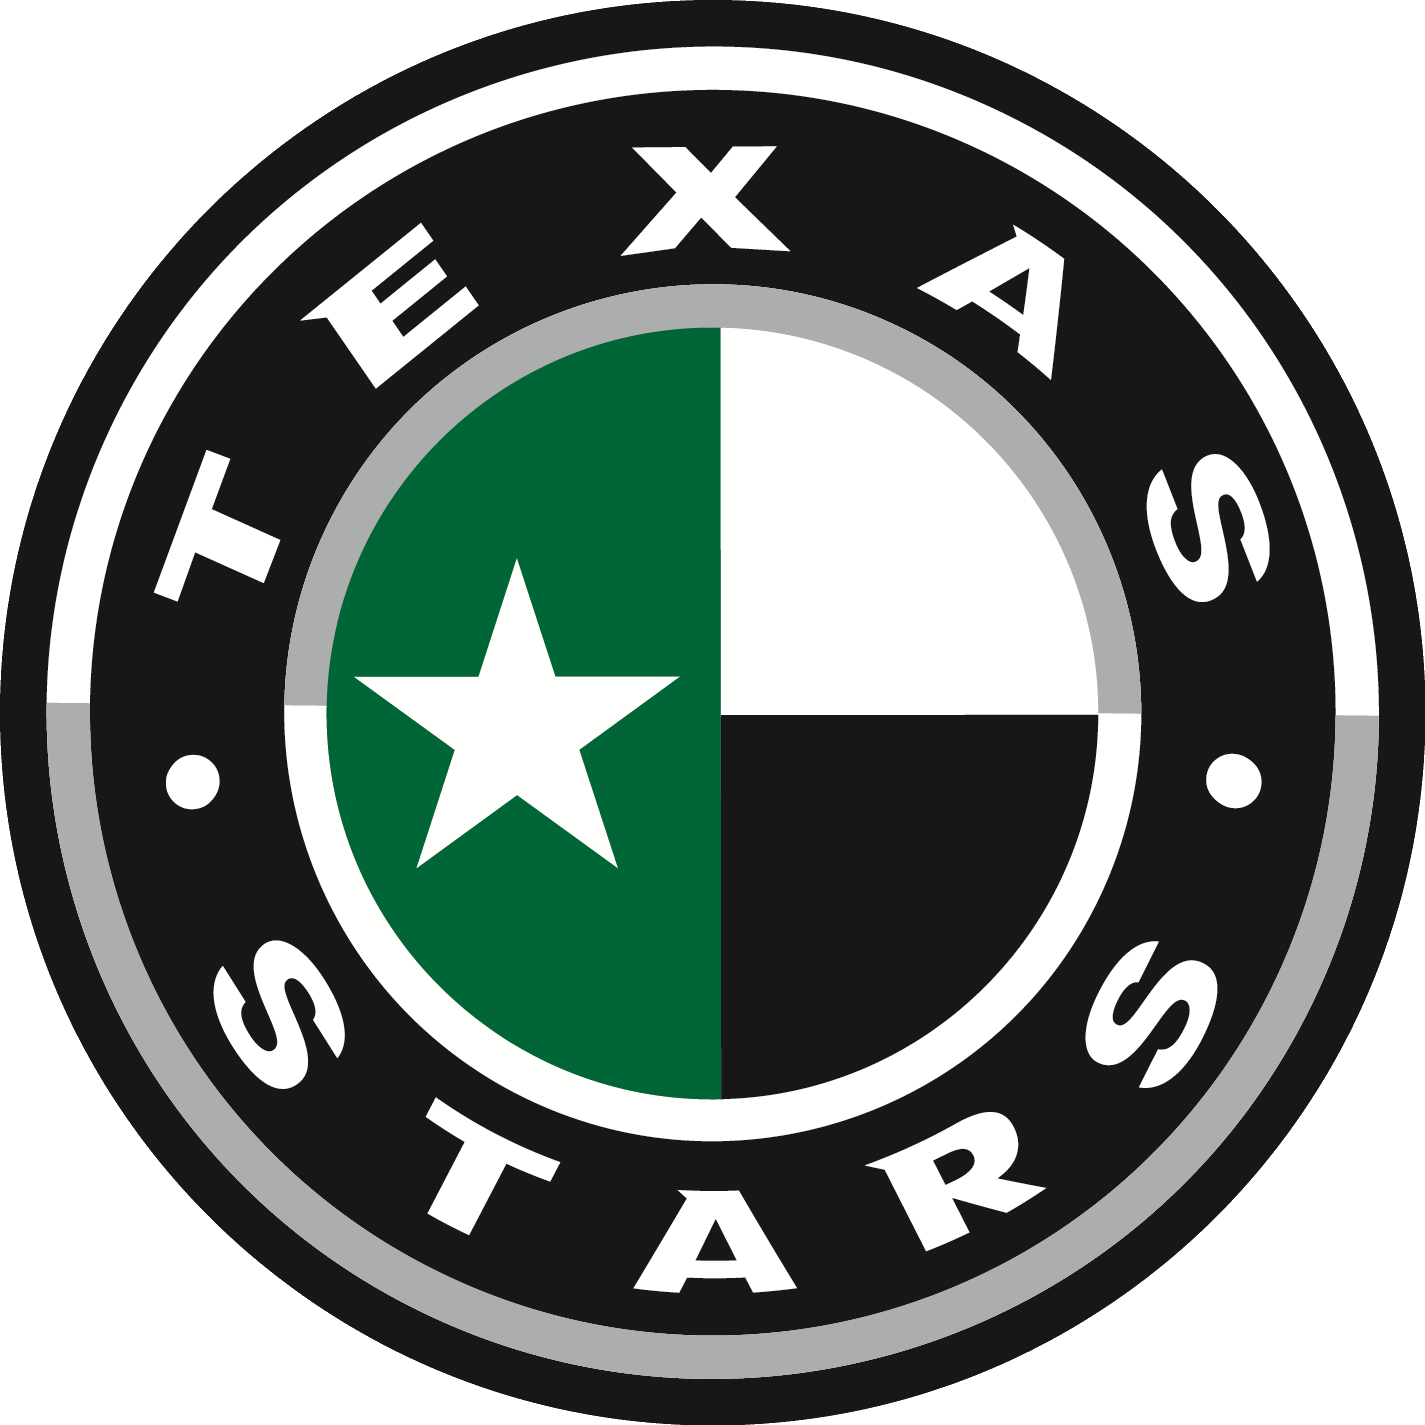 With Texas Stars President Rick Mclaughlin This Afternoon - Dallas Stars Logo Png (1425x1425)